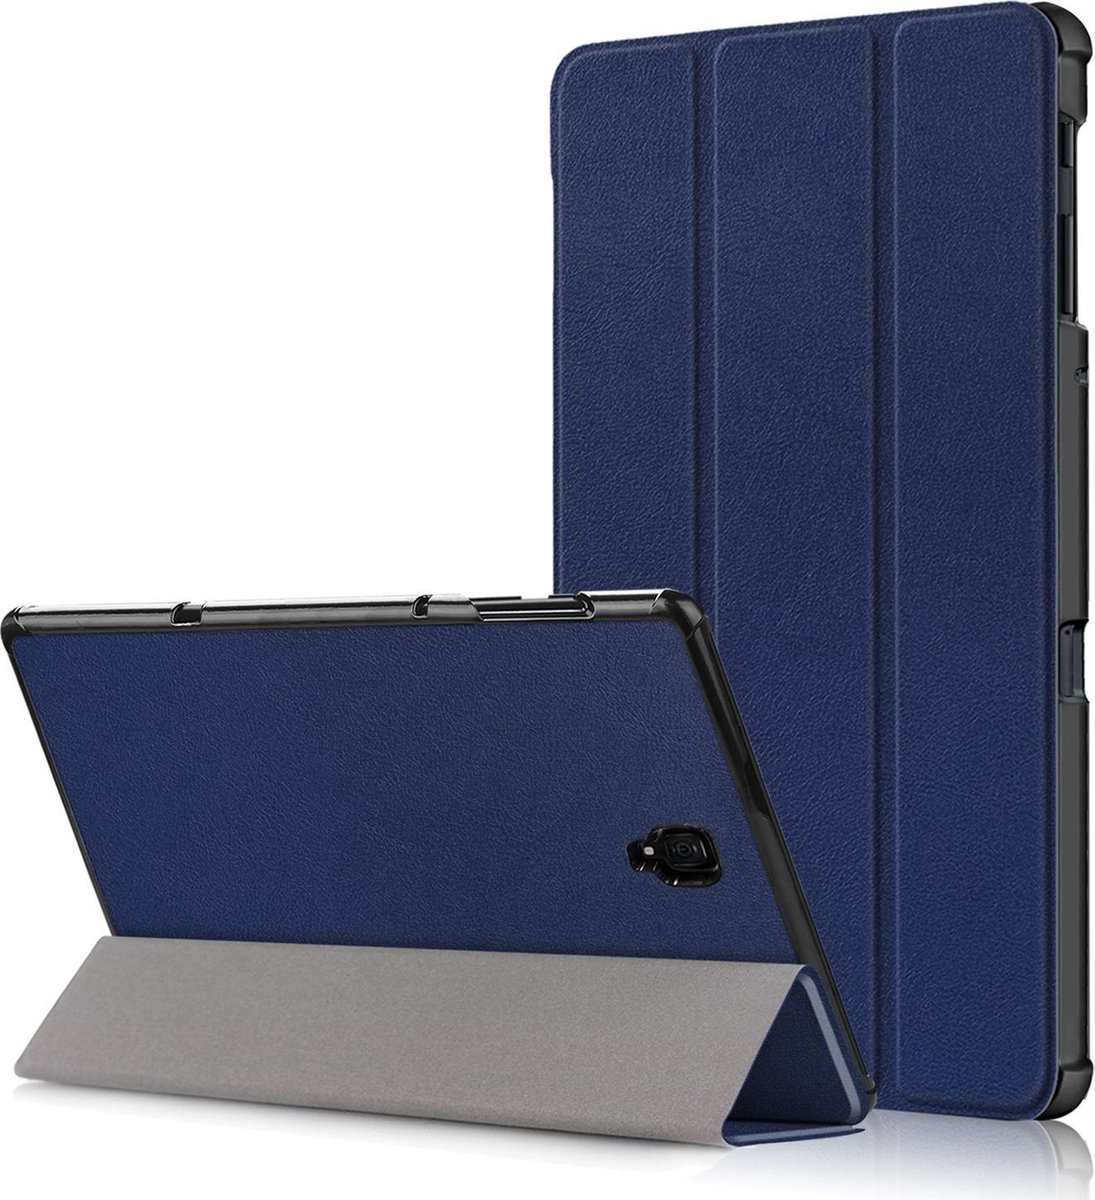 Samsung Galaxy Tab A 10.5 2018 Hoesje Book Case Hoes Cover Donkerblauw - BTH